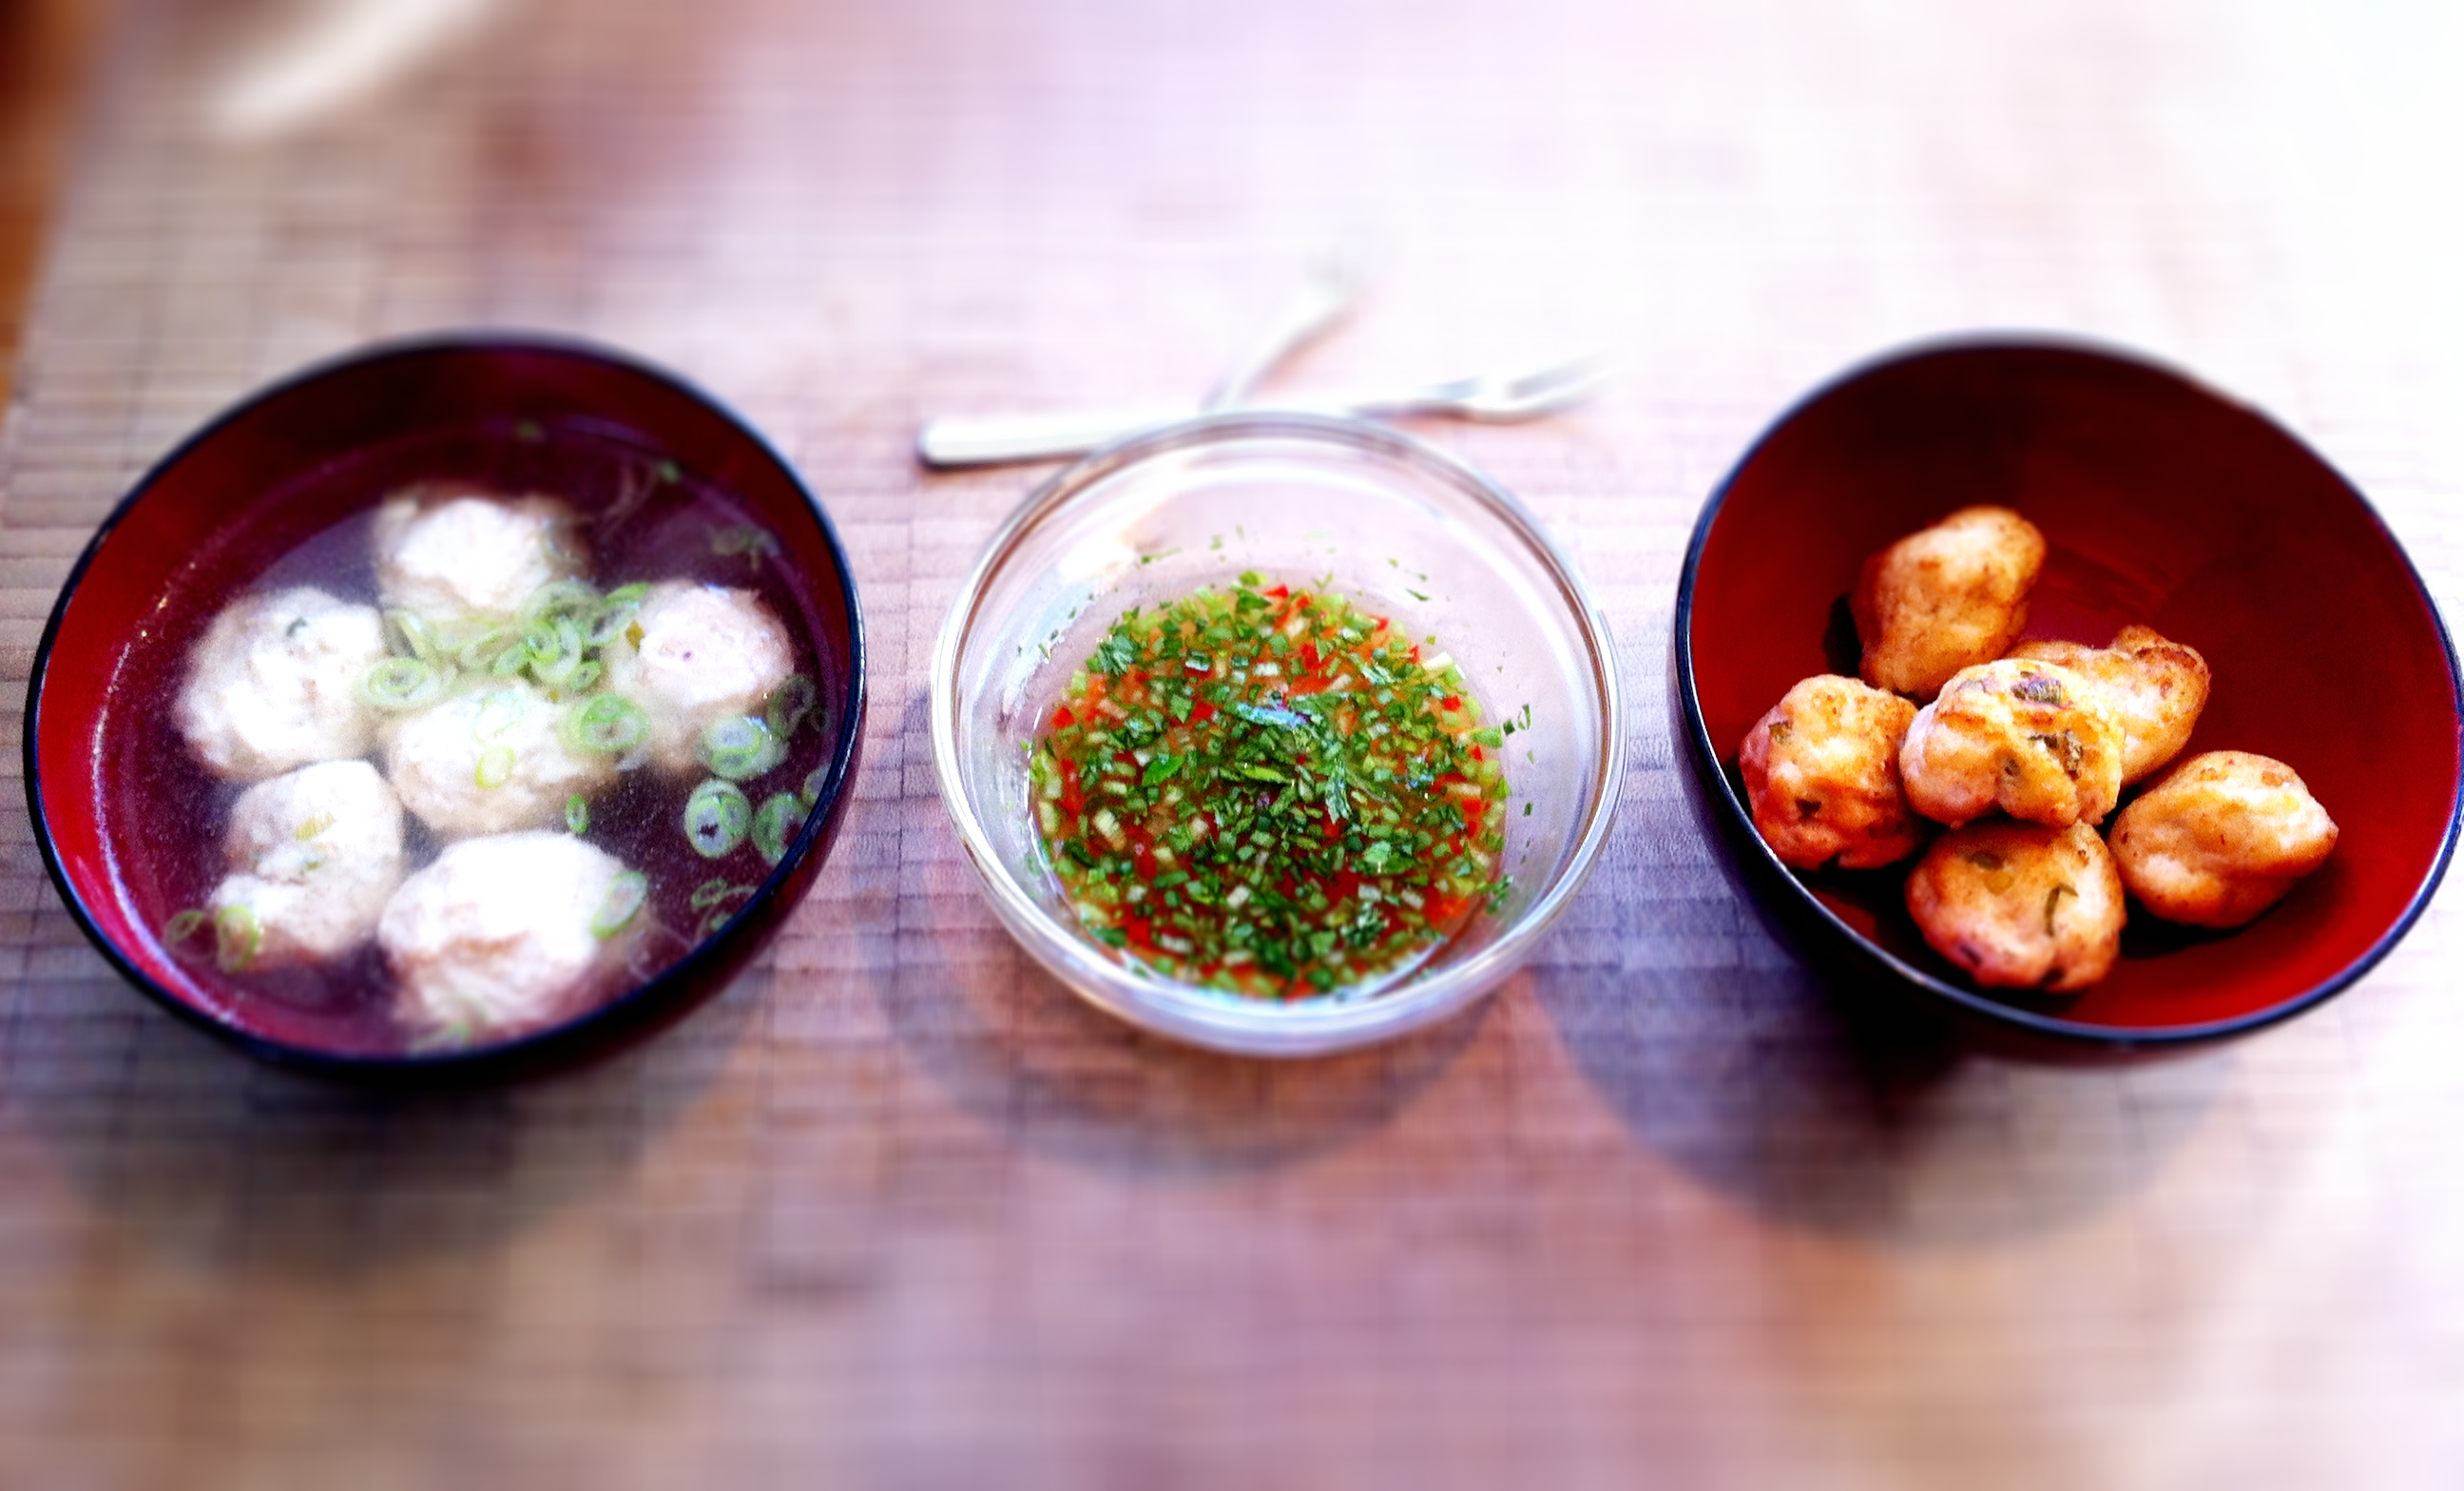 Squid and tilapia fish balls cooked 2 ways